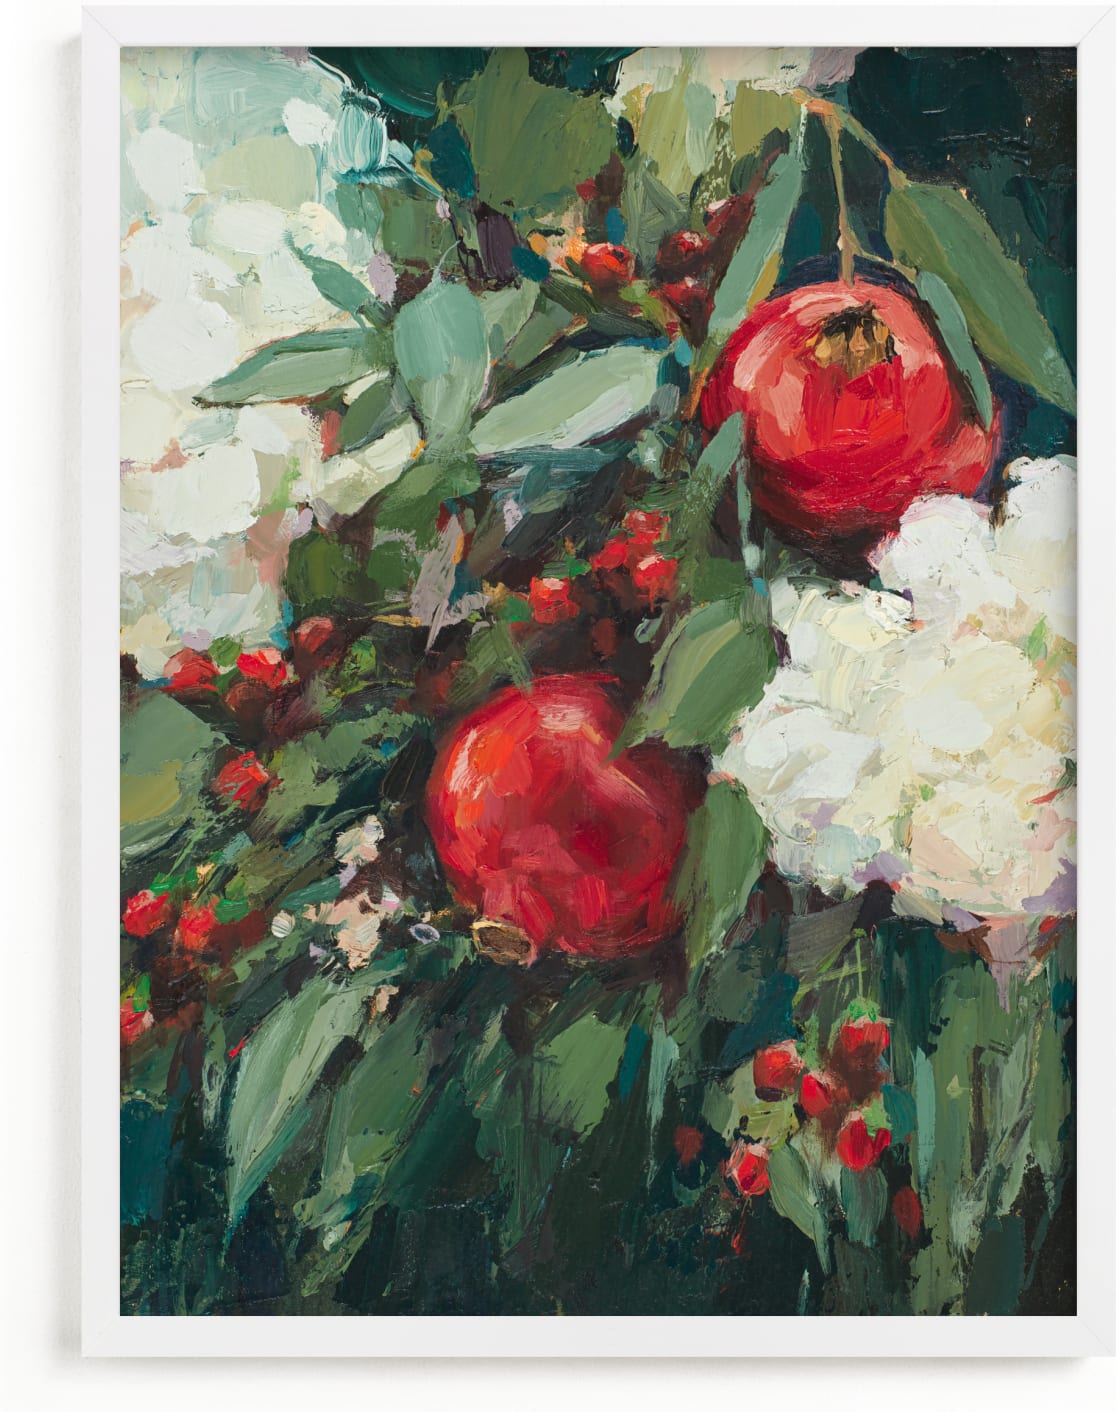 This is a white art by Wendy Keller called Pomegranate.